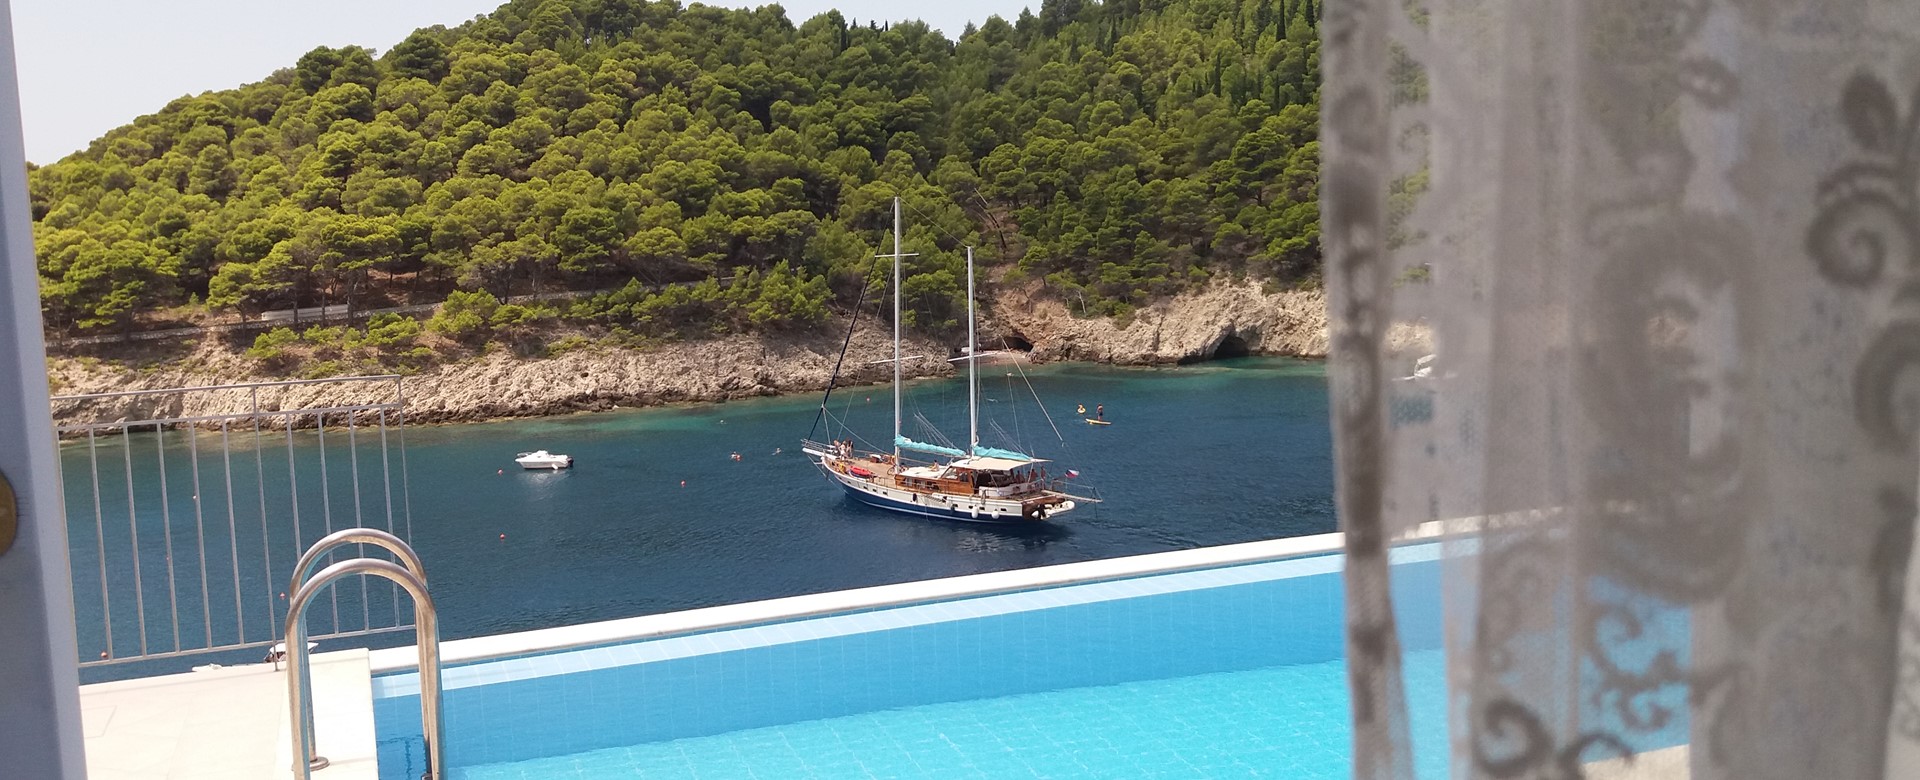 View from inside Villa Panorama looking out into the bay with yacht and private pool